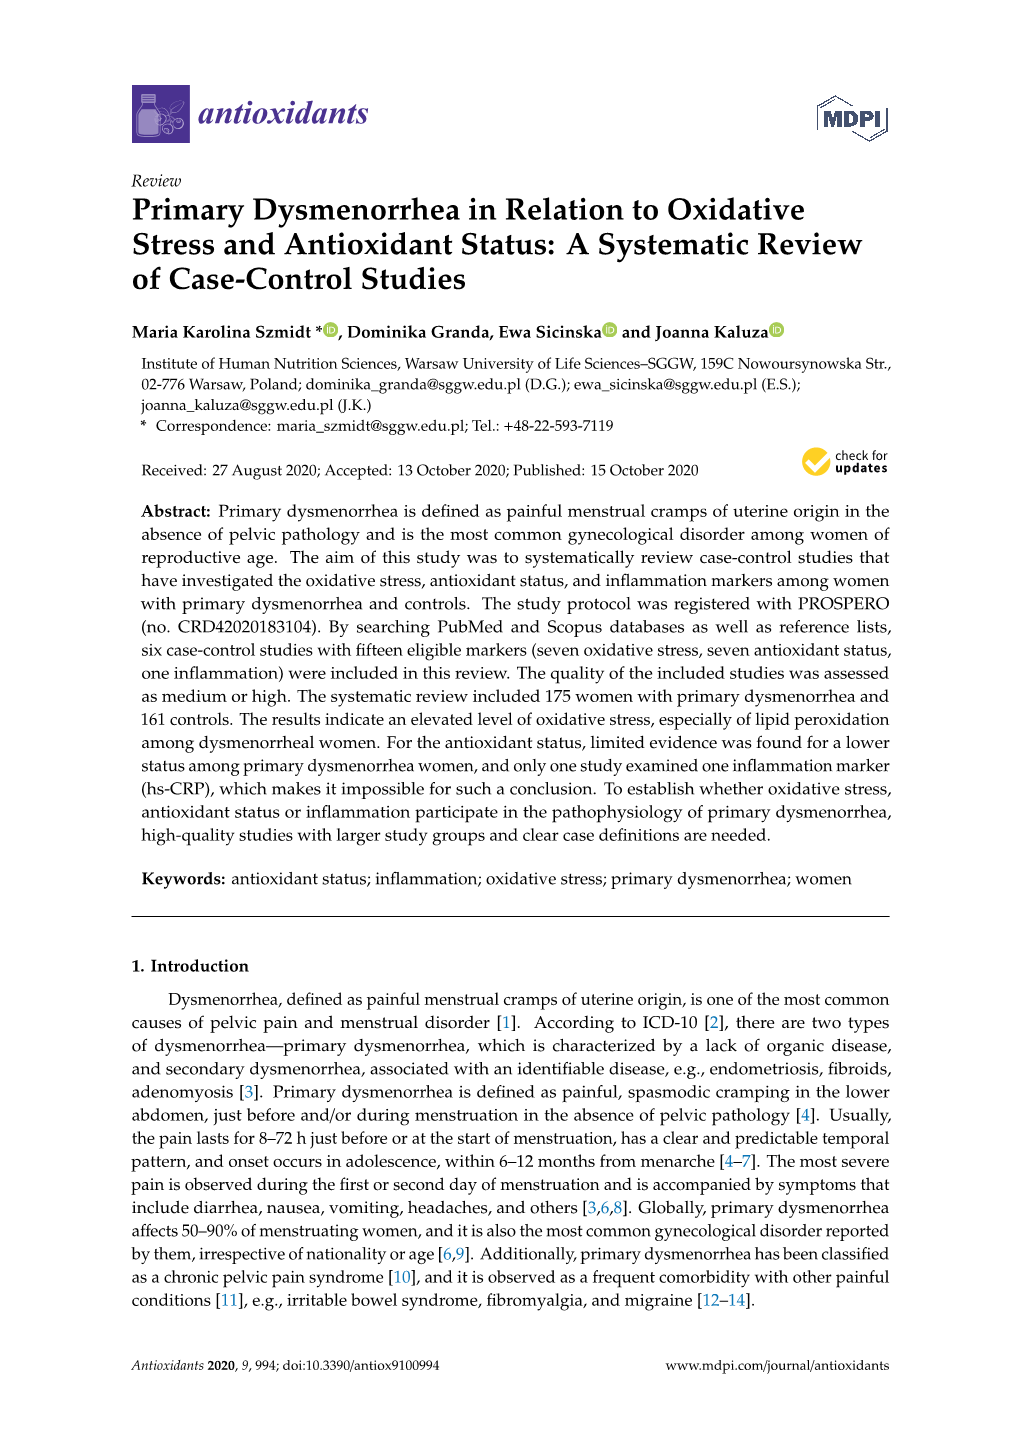 Primary Dysmenorrhea in Relation to Oxidative Stress and Antioxidant Status: a Systematic Review of Case-Control Studies